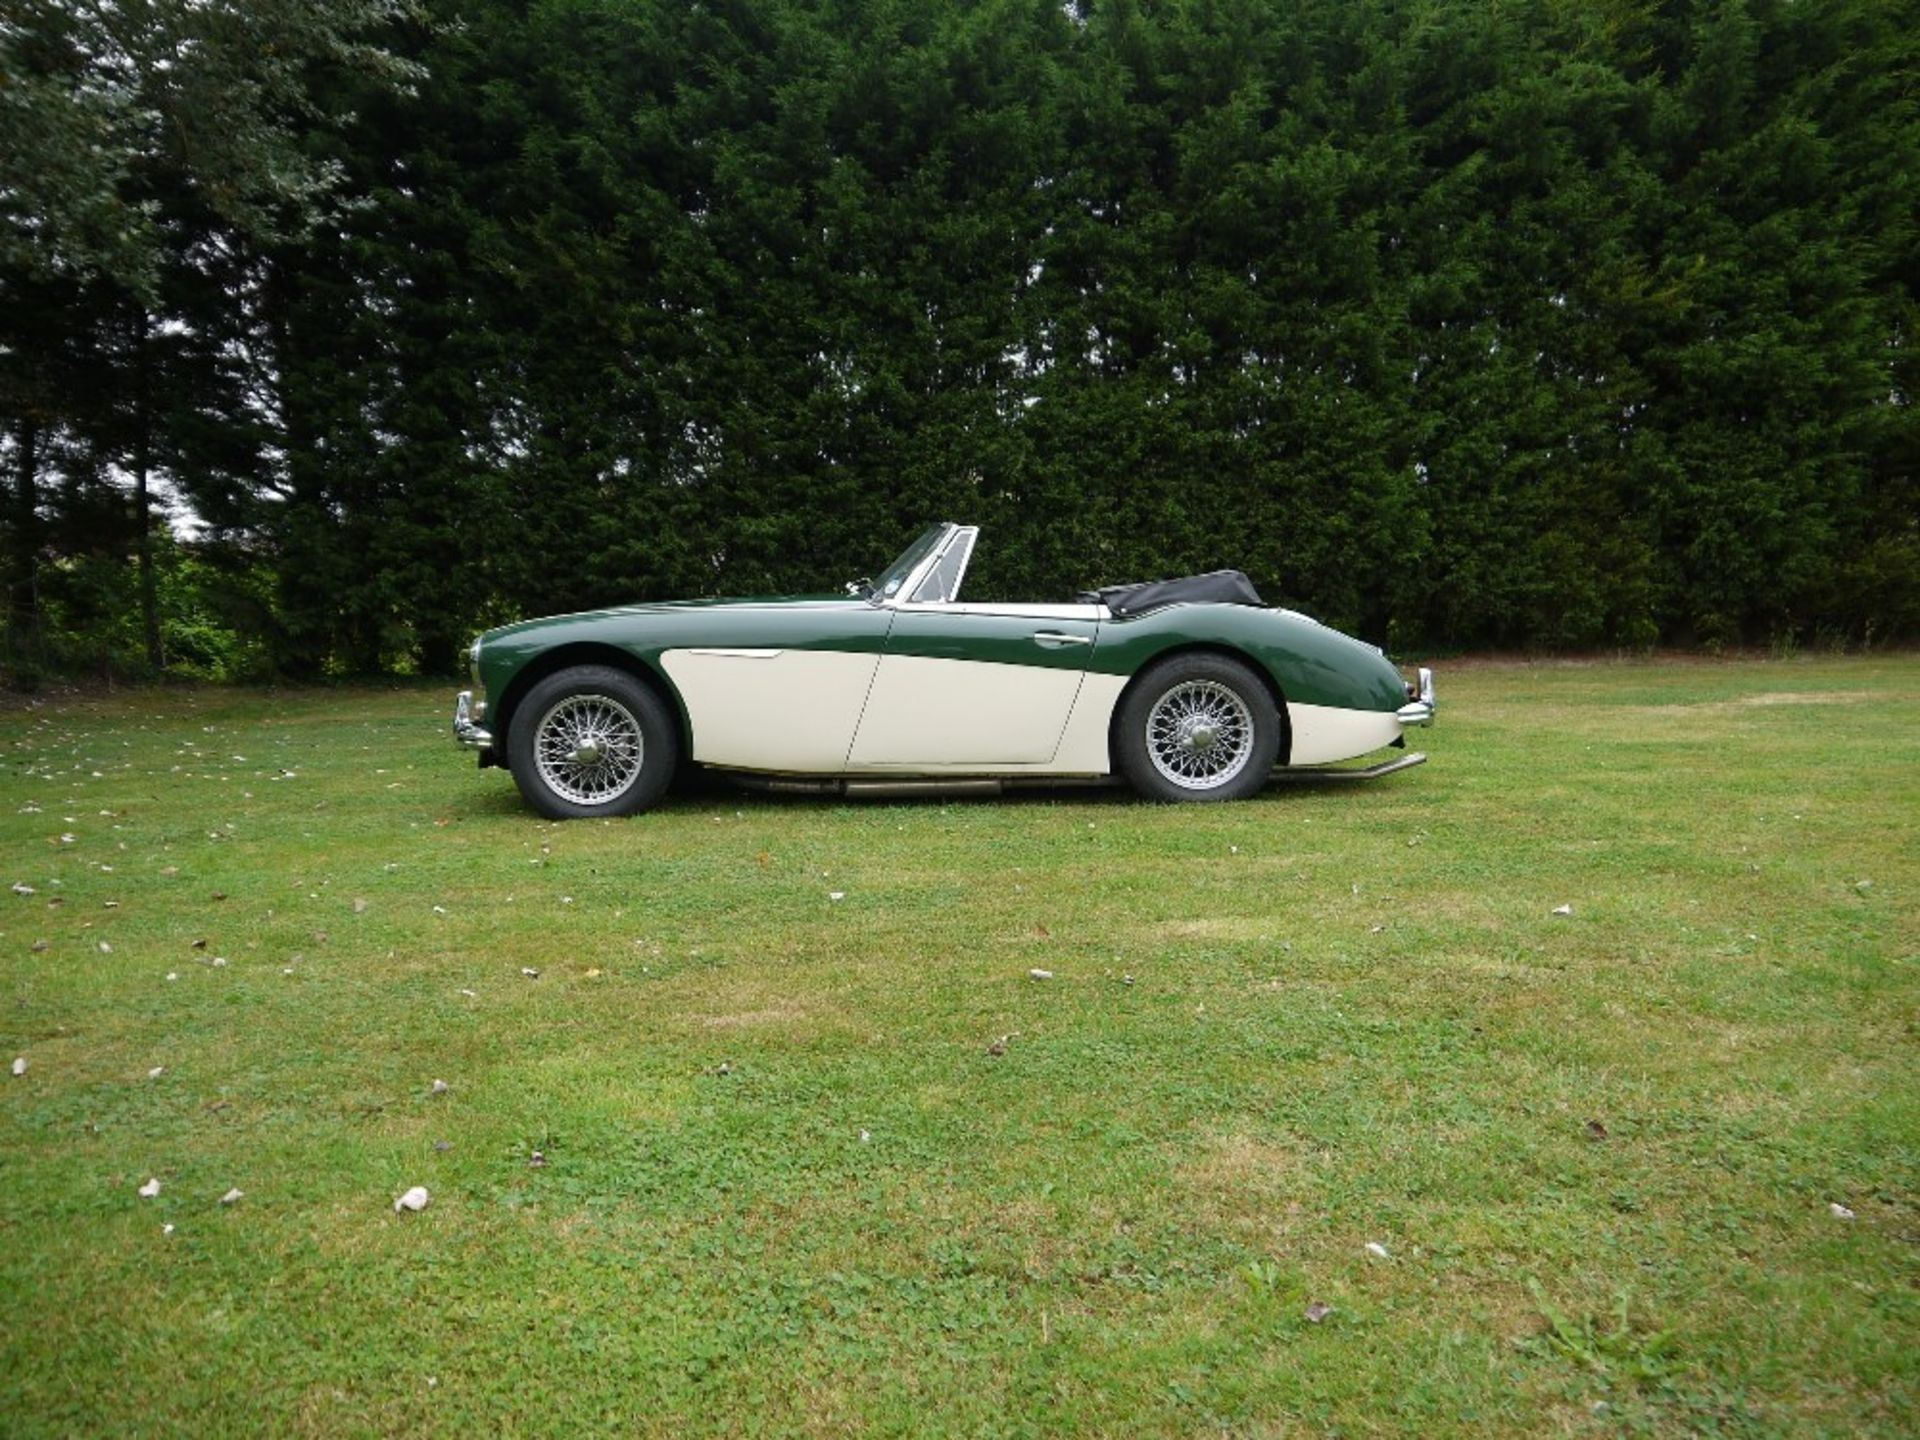 1963 AUSTIN-HEALEY 3000 MARK II Registration Number: MJF 346 Chassis Number: H-BJ7-24376 Recorded - Image 5 of 22